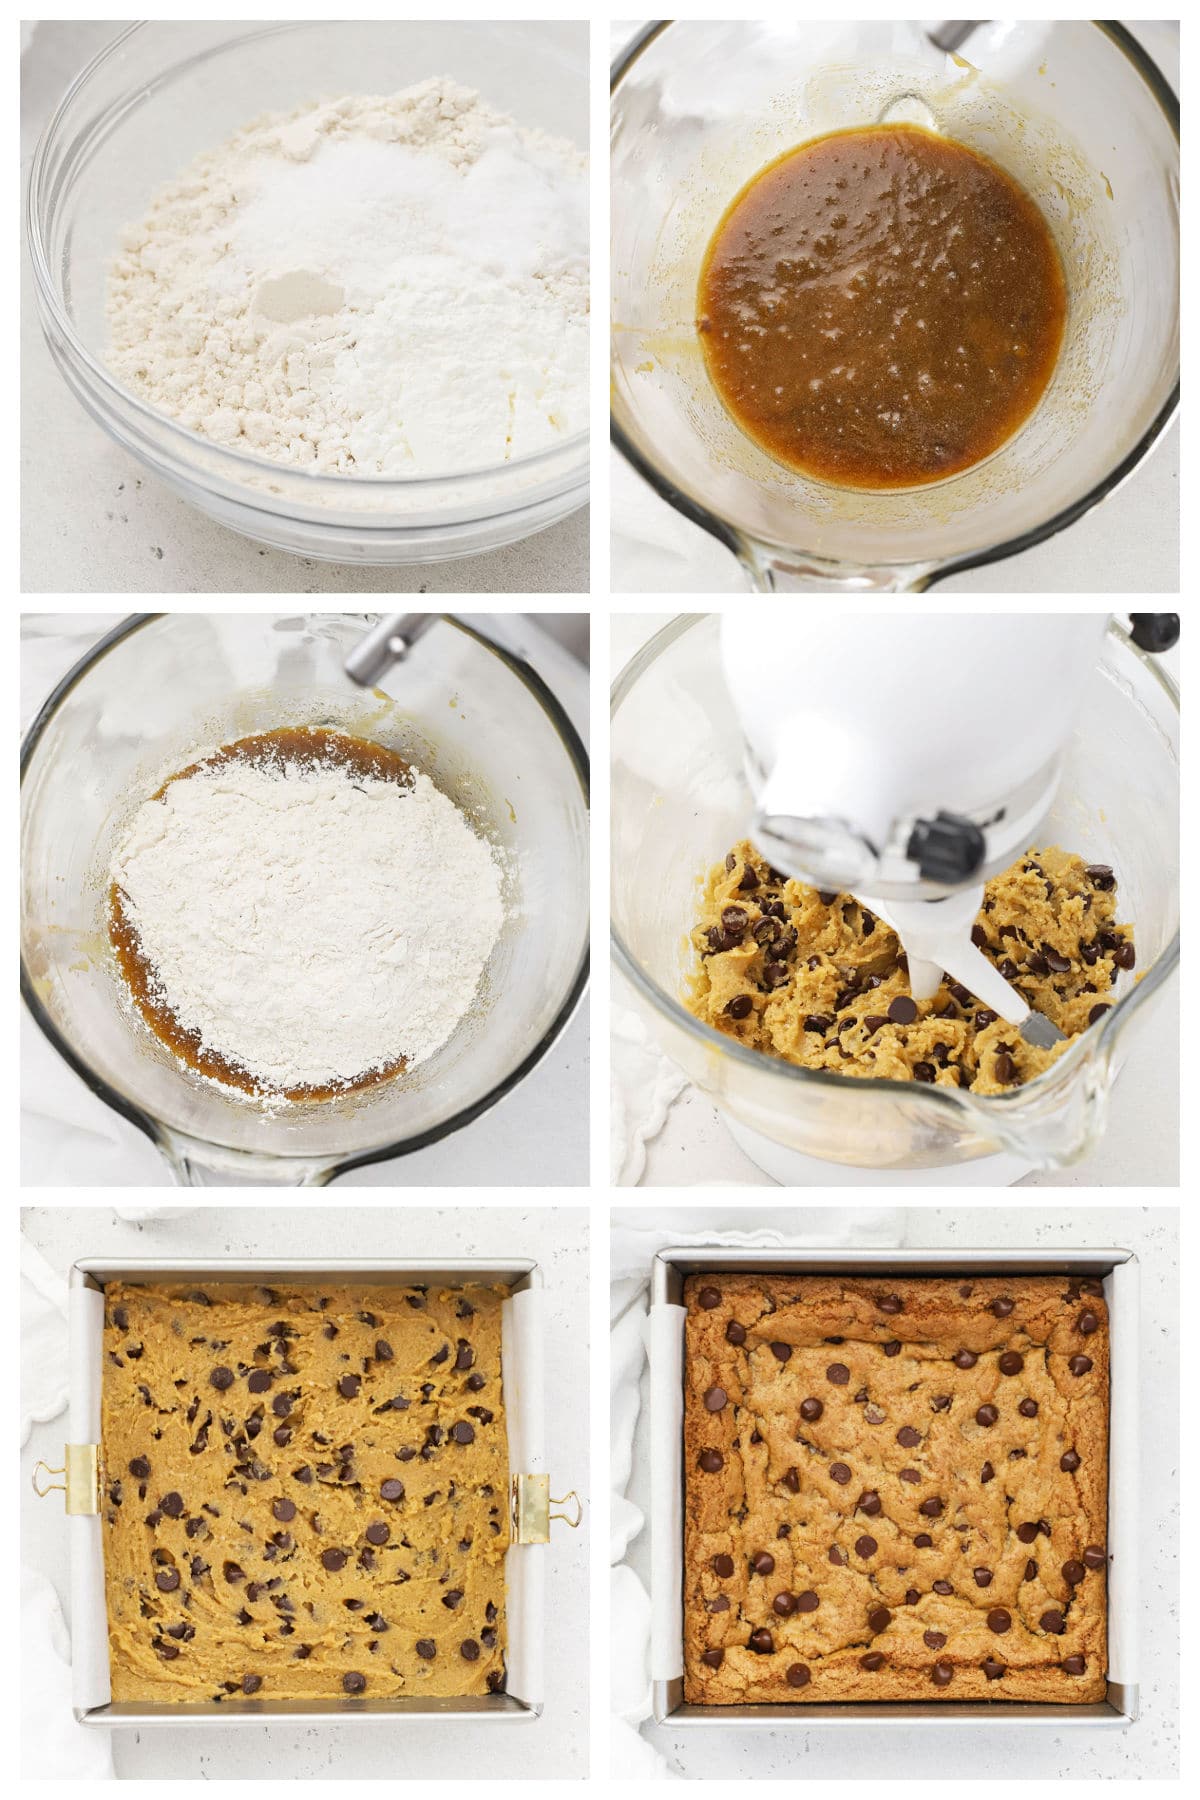 Making chocolate chip cookie bars step by step